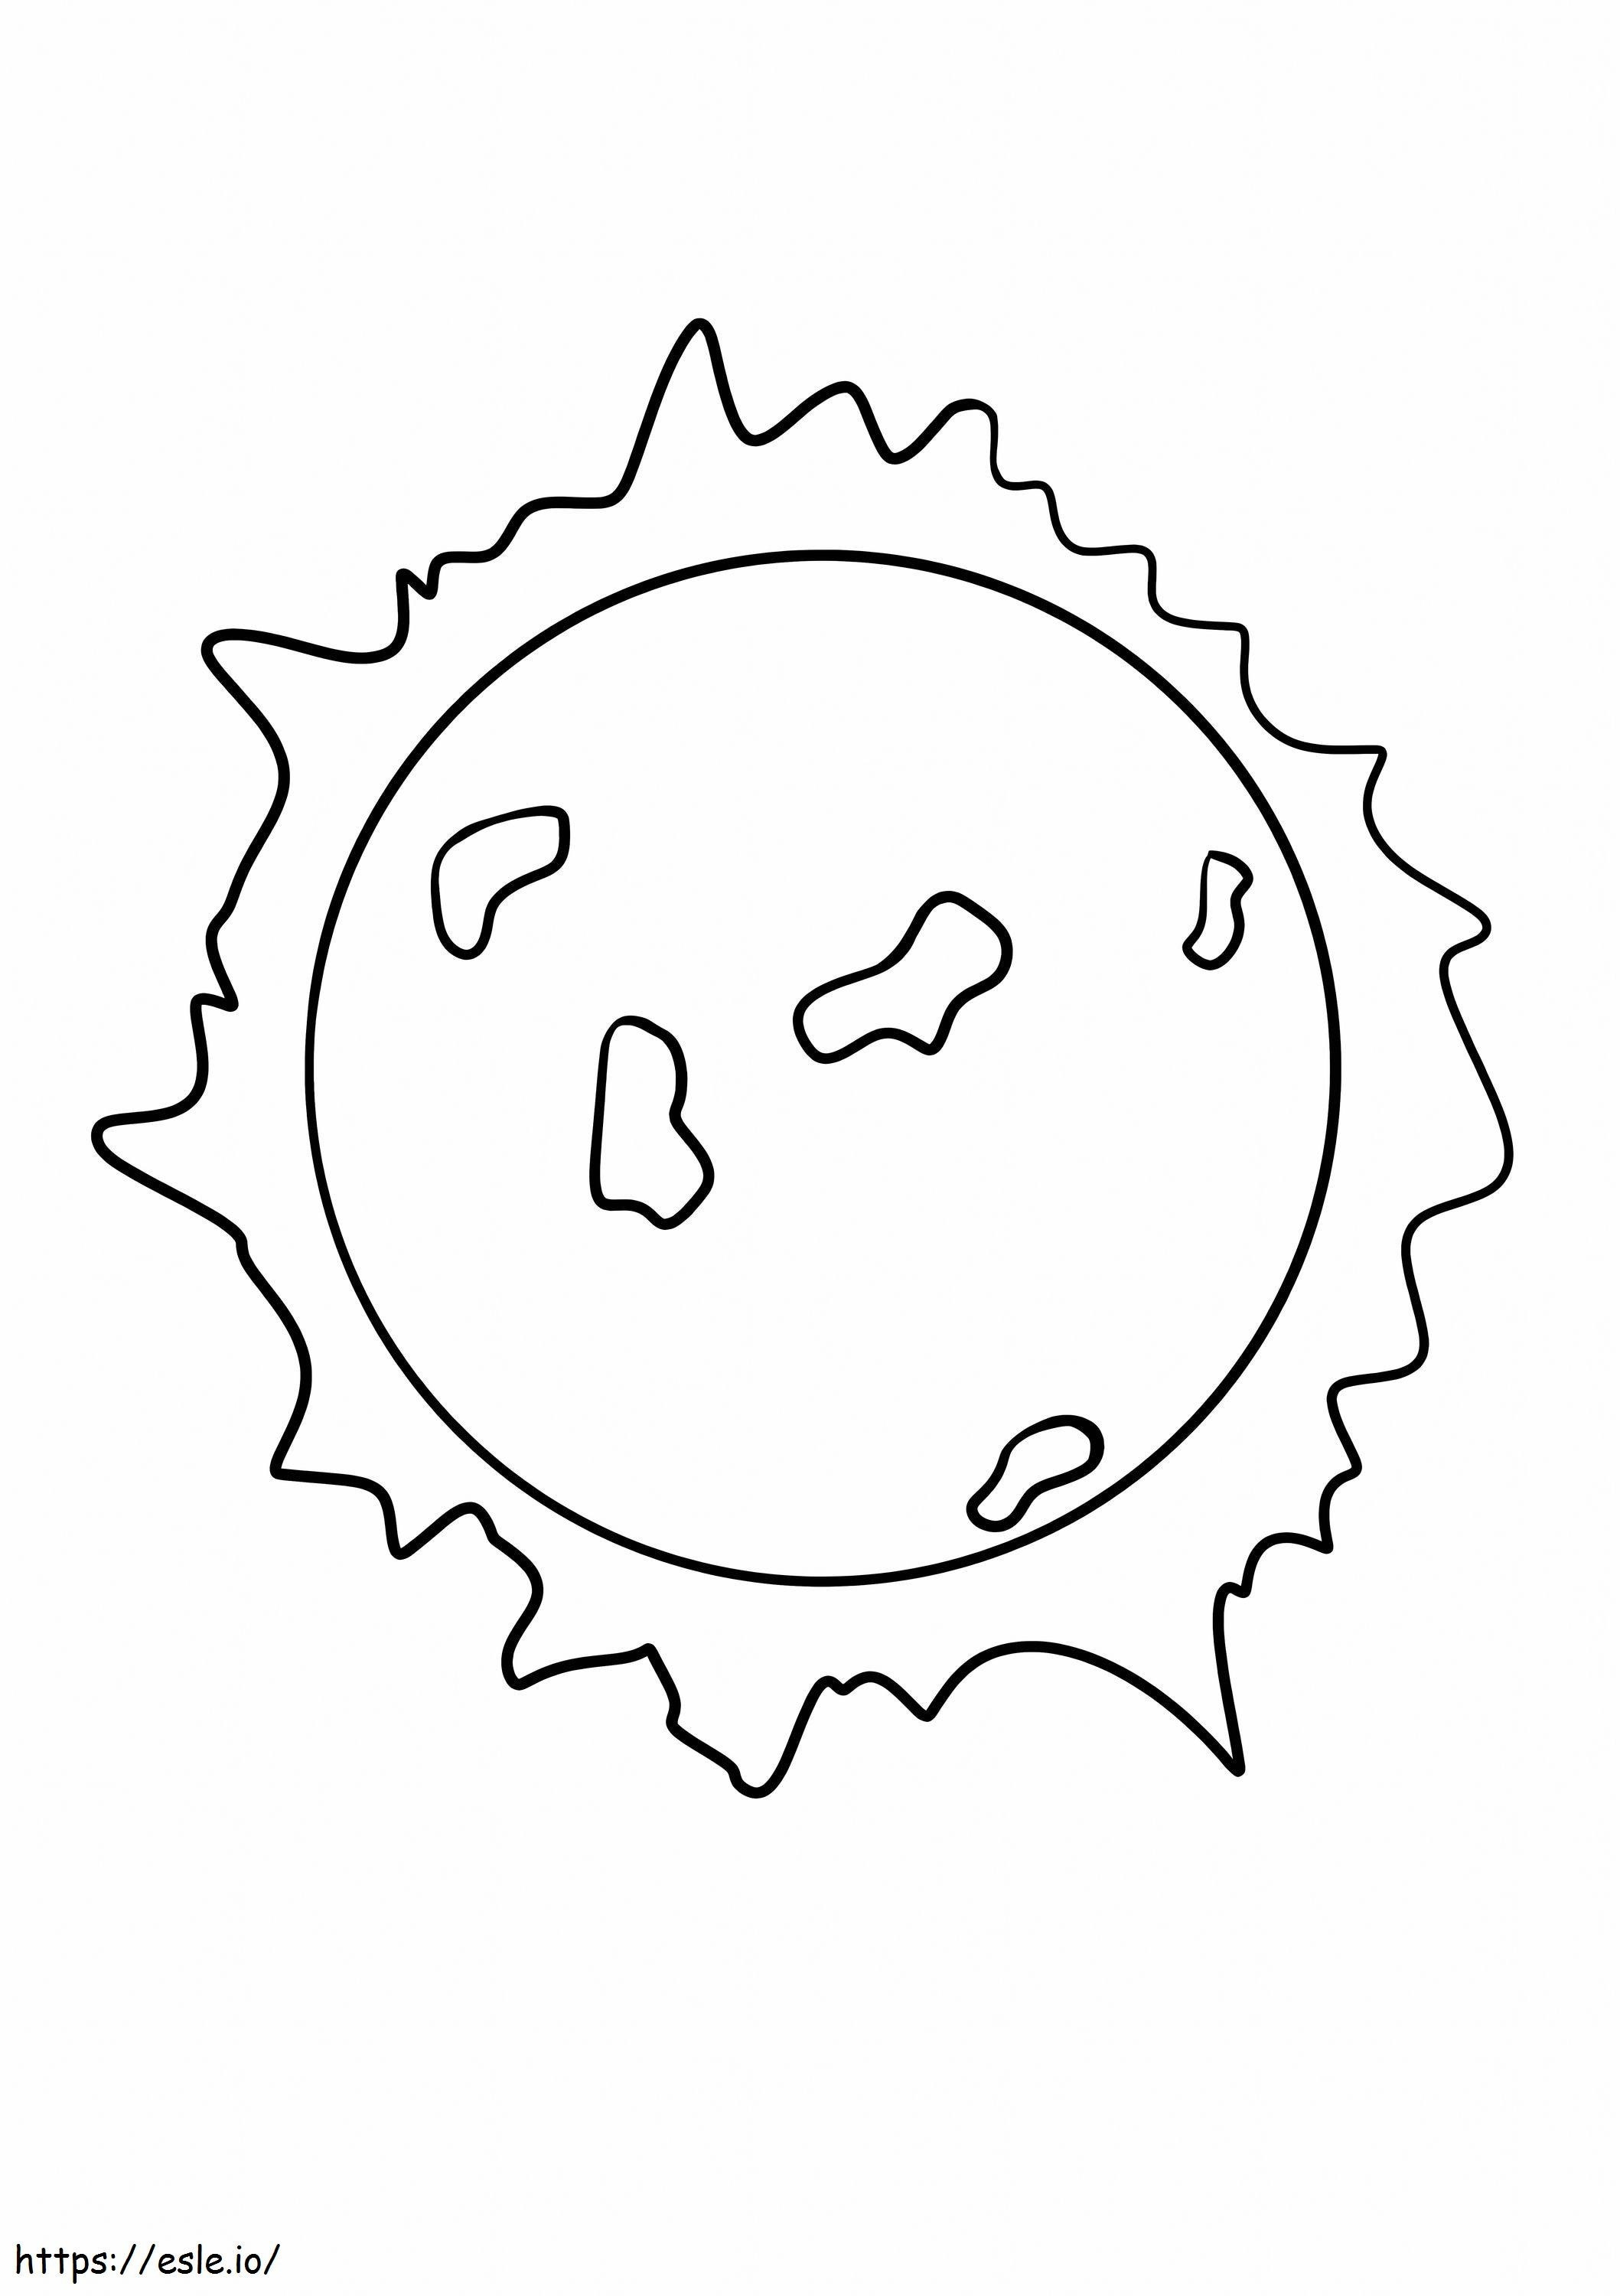 Basic Sun coloring page